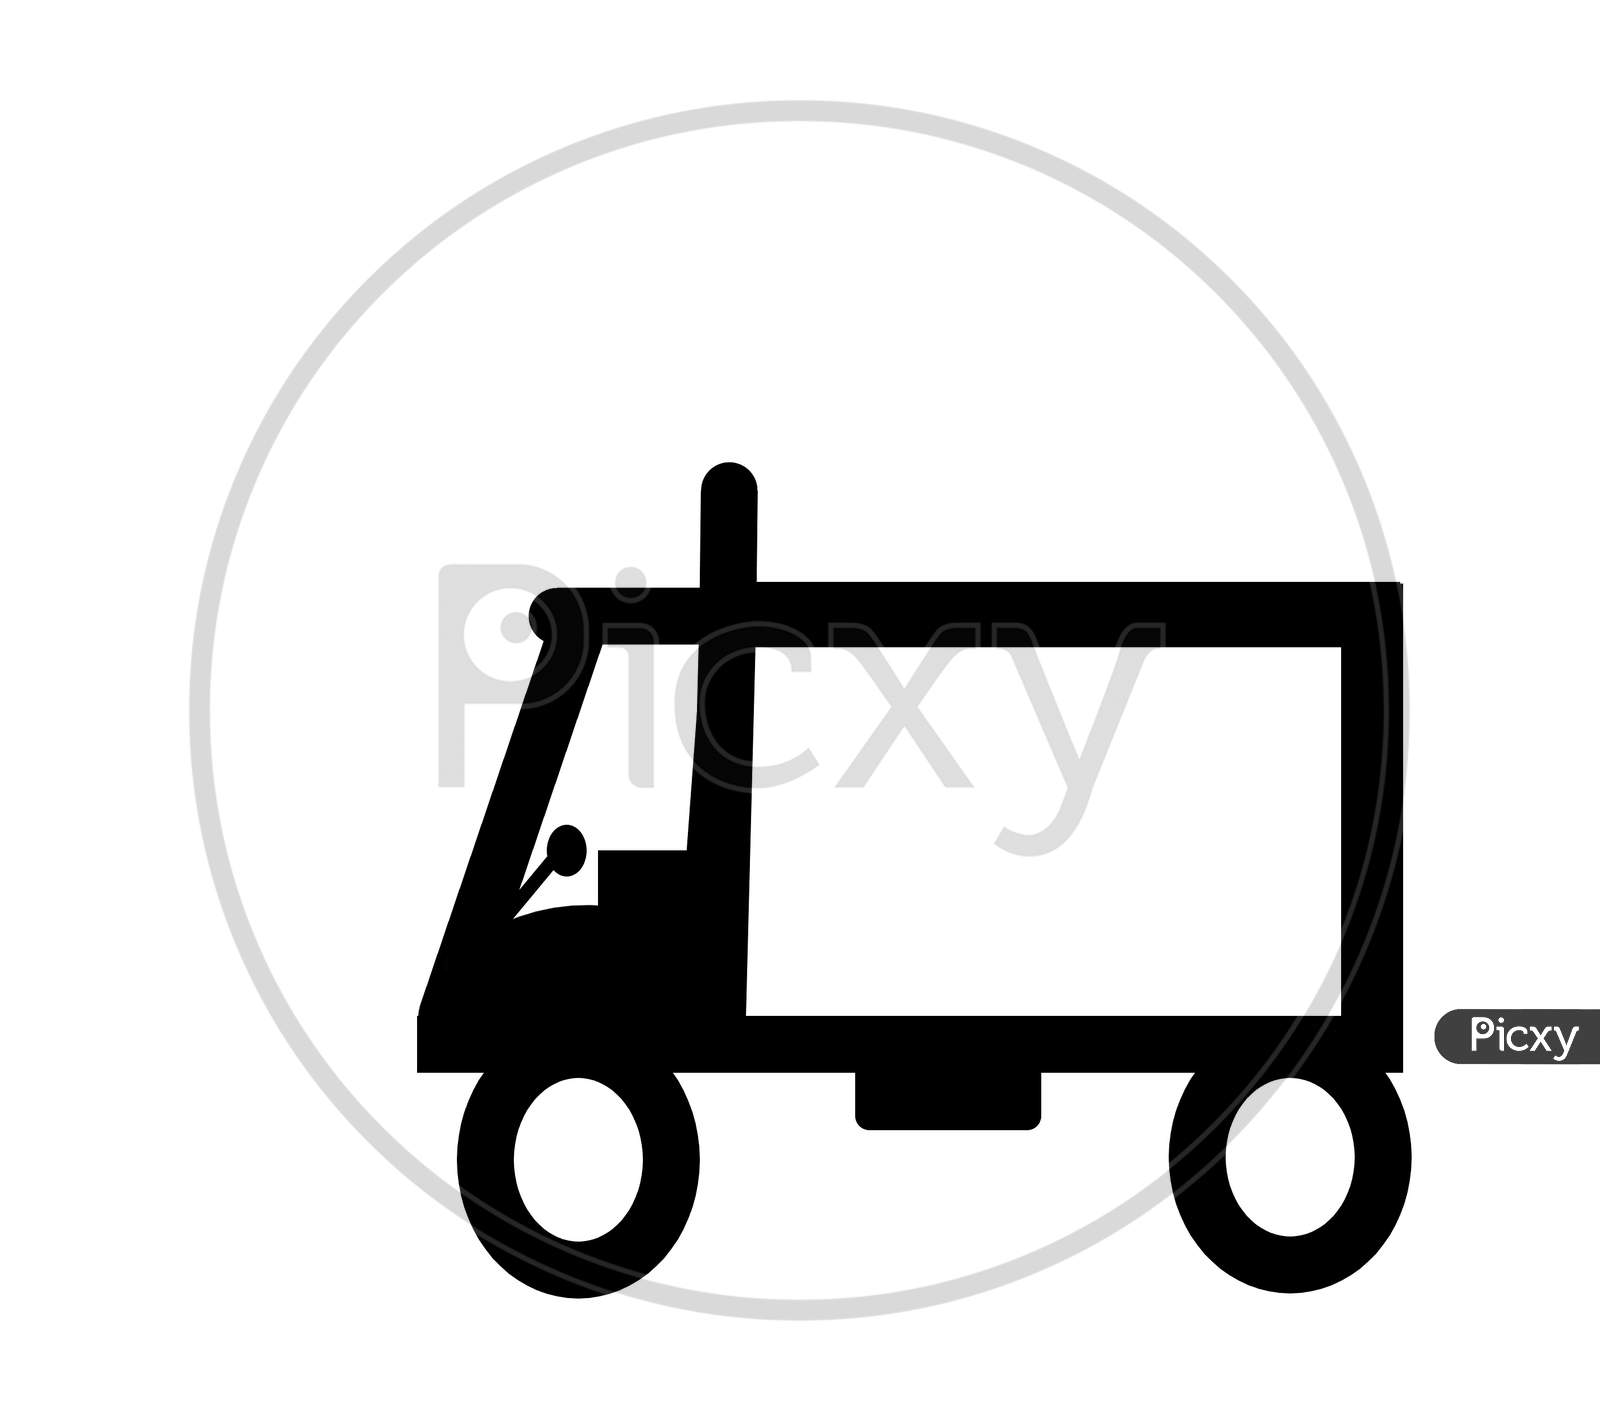 Toy Truck With White Background. Computer Design Small Truck Illustration.